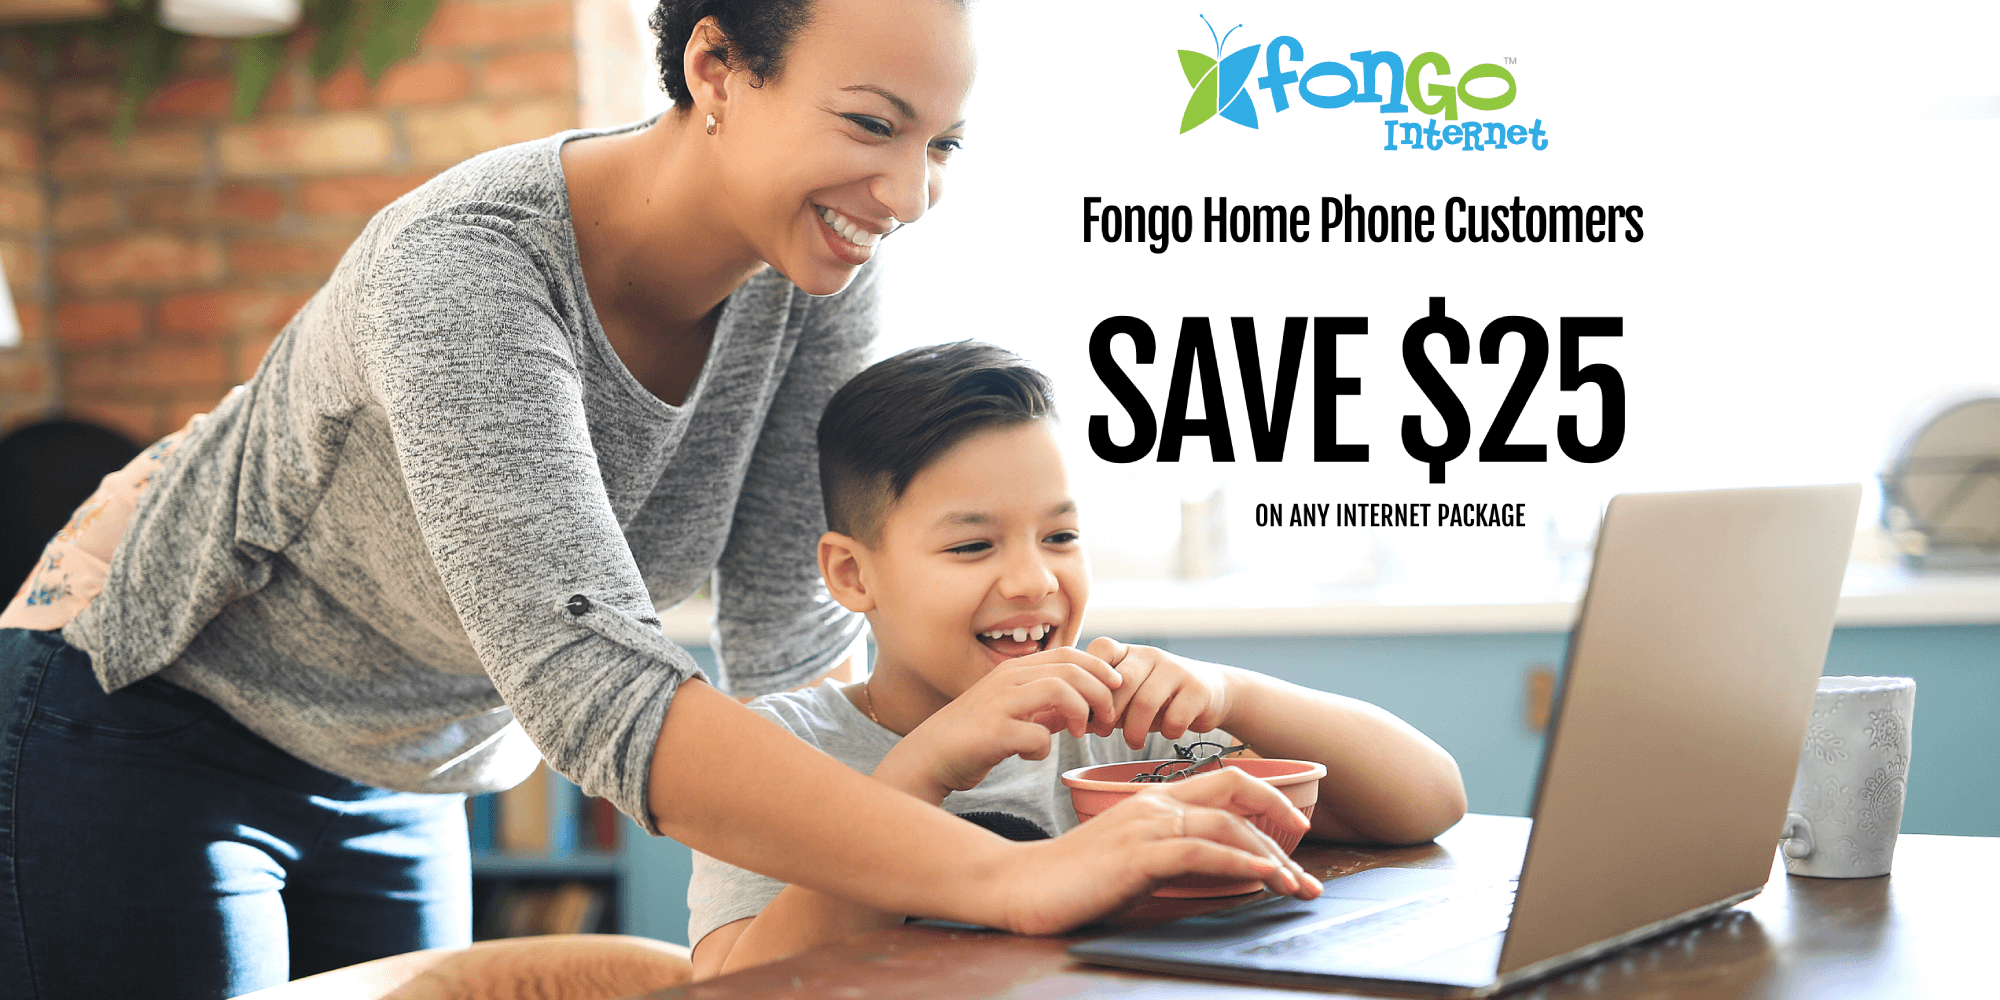 Fongo Home Phone customer save $25 on Fongo internet packages. Mother at the kitchen table with her son, happily using a computer together.